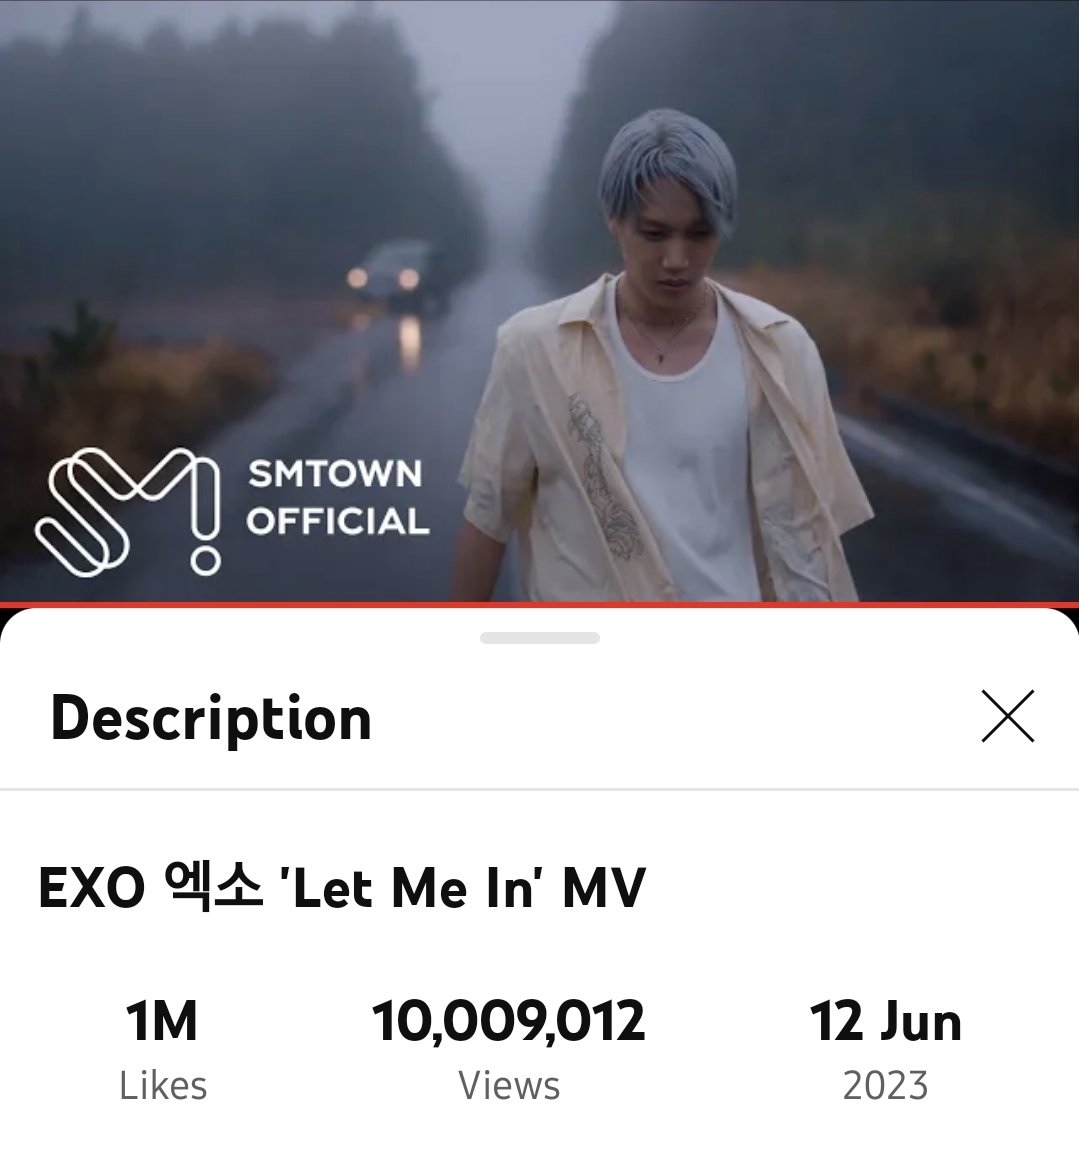 Let Me In MV has now surpassed 10 MILLION views on YouTube! 🎉

KEEP STREAMING! 🔥

🎬 youtu.be/91VhCIQNjIc

#LetMeInbyEXO #EXO_EXIST
#EXO #엑소 @weareoneEXO